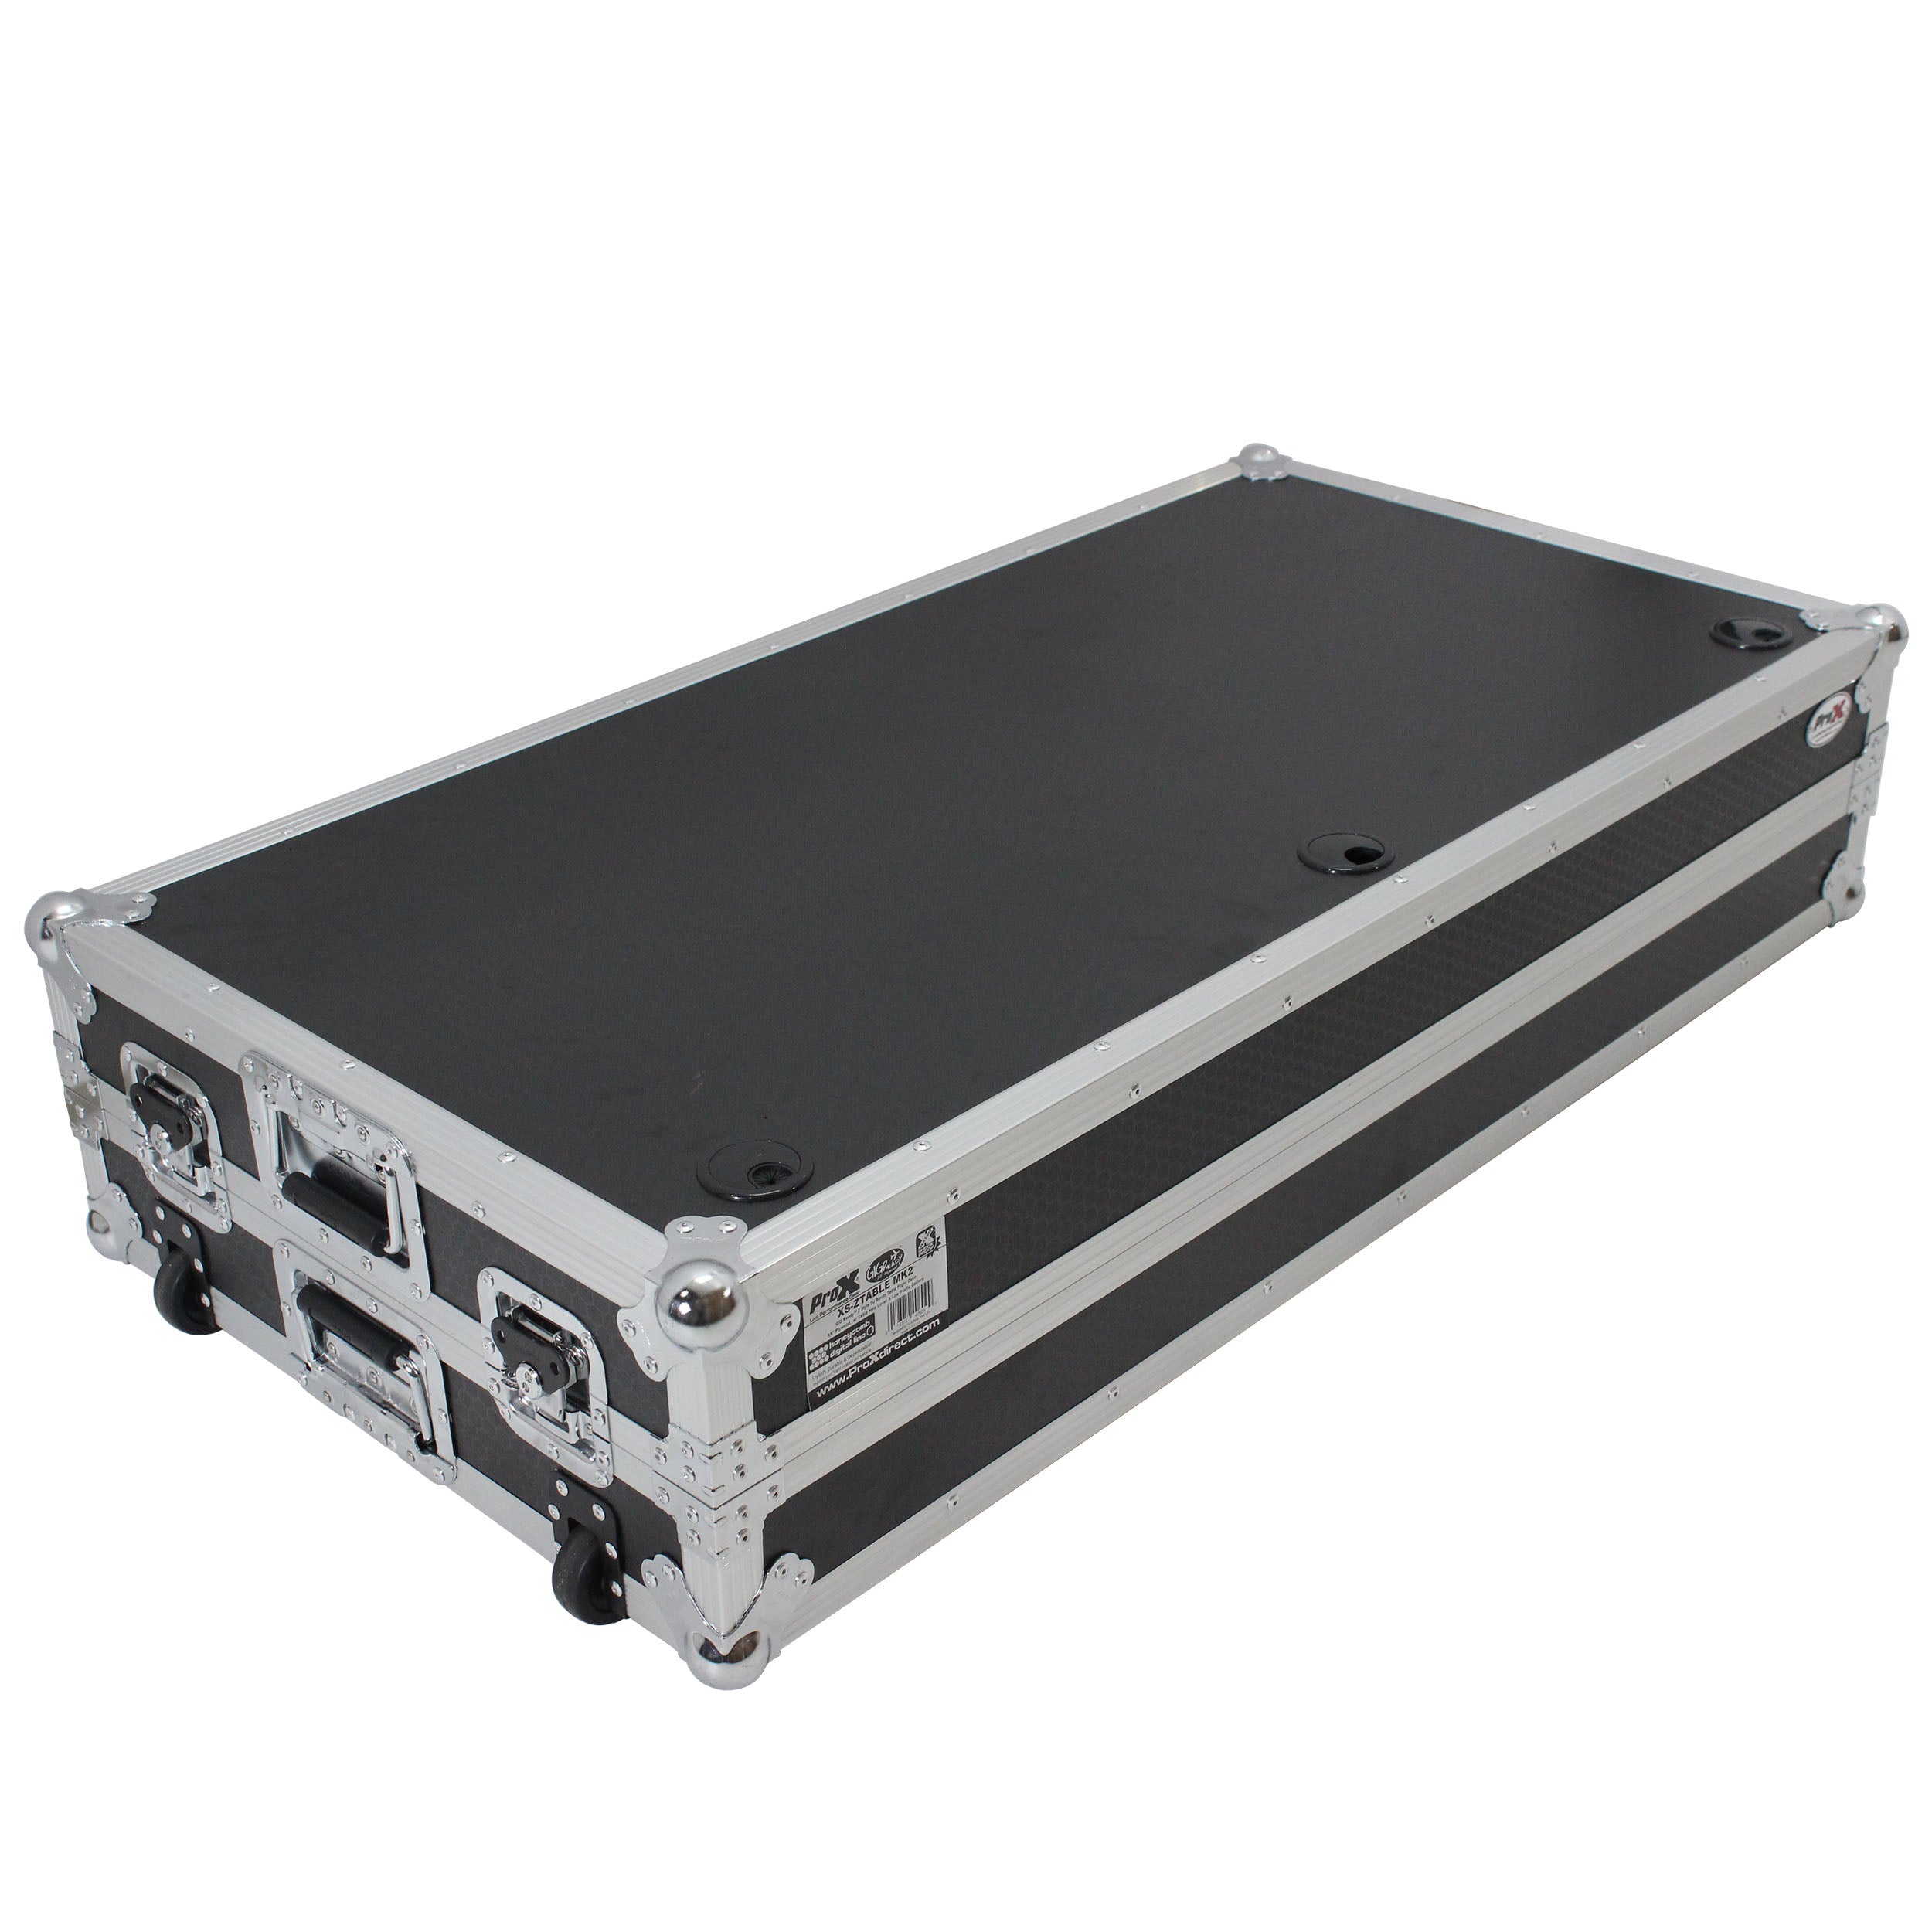 Pro X Z-Table Folding DJ Table Mobile Workstation Flight Case Style with Handles and Wheels XS-ZTABLE